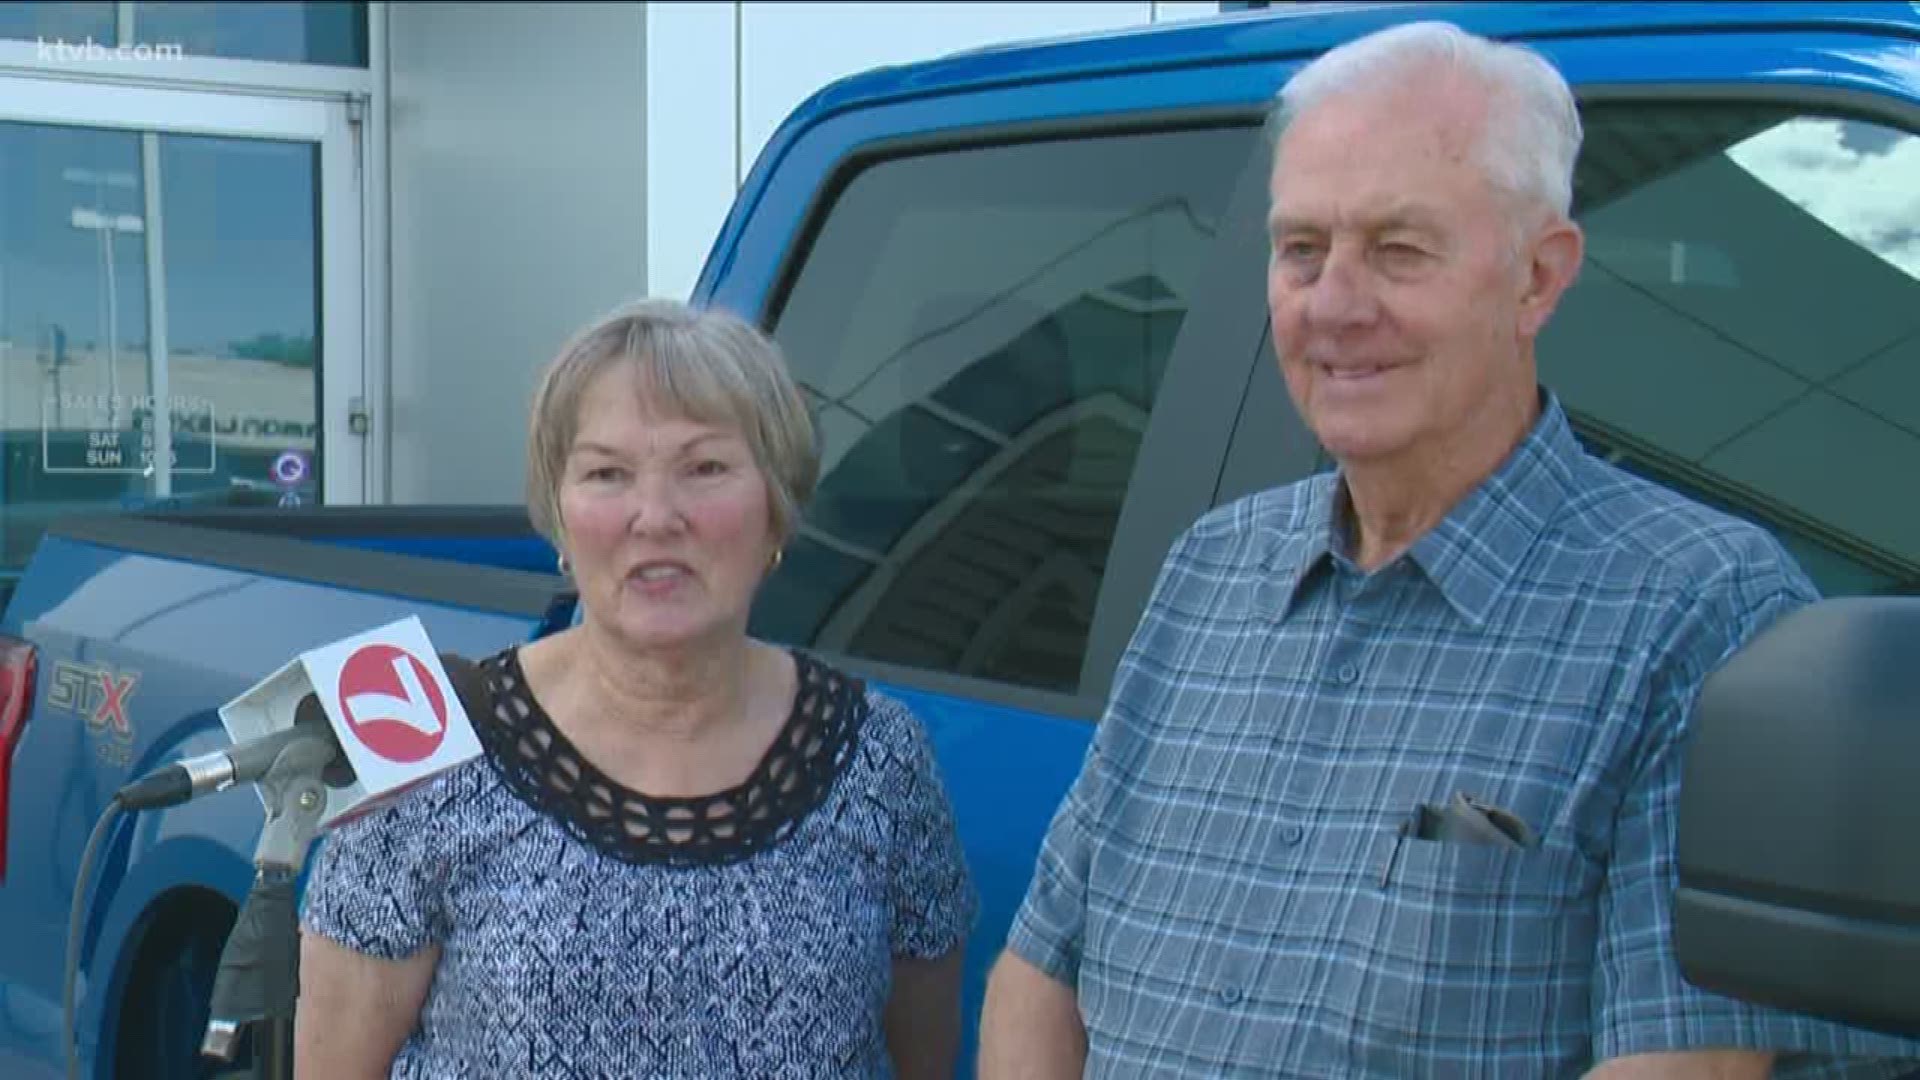 Karen and Don Taylor picked up their new truck on Friday courtesy of Treasure Valley Ford stores.